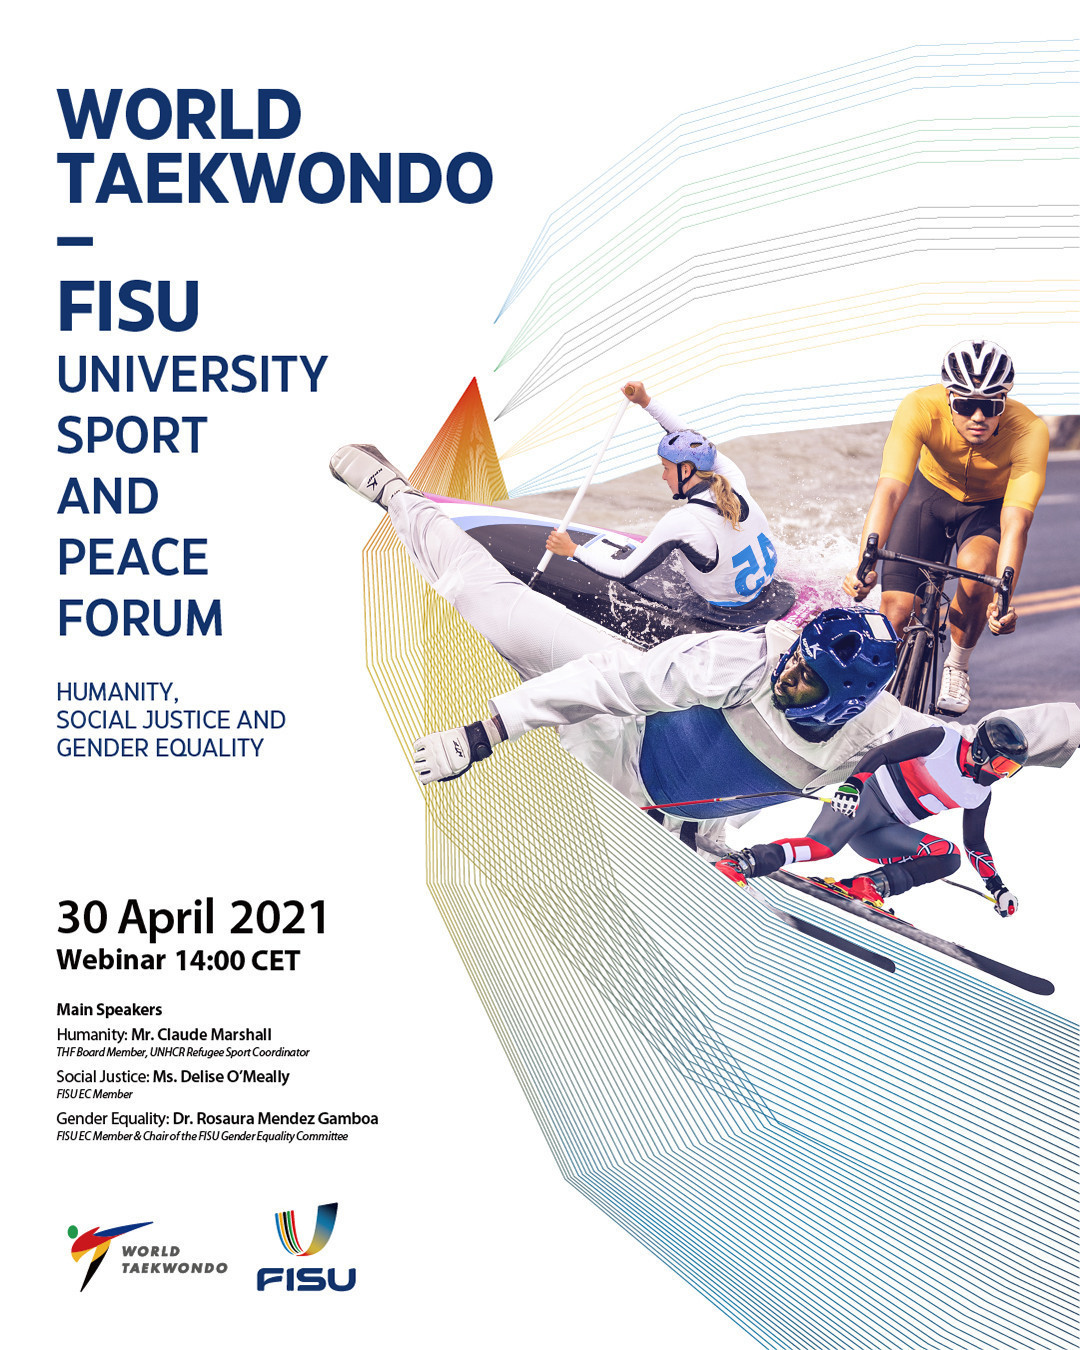 The vital role of sport for refugees was among topics discussed at the first World Taekwondo-FISU University Sport and Peace Forum ©Twitter/World Taekwondo